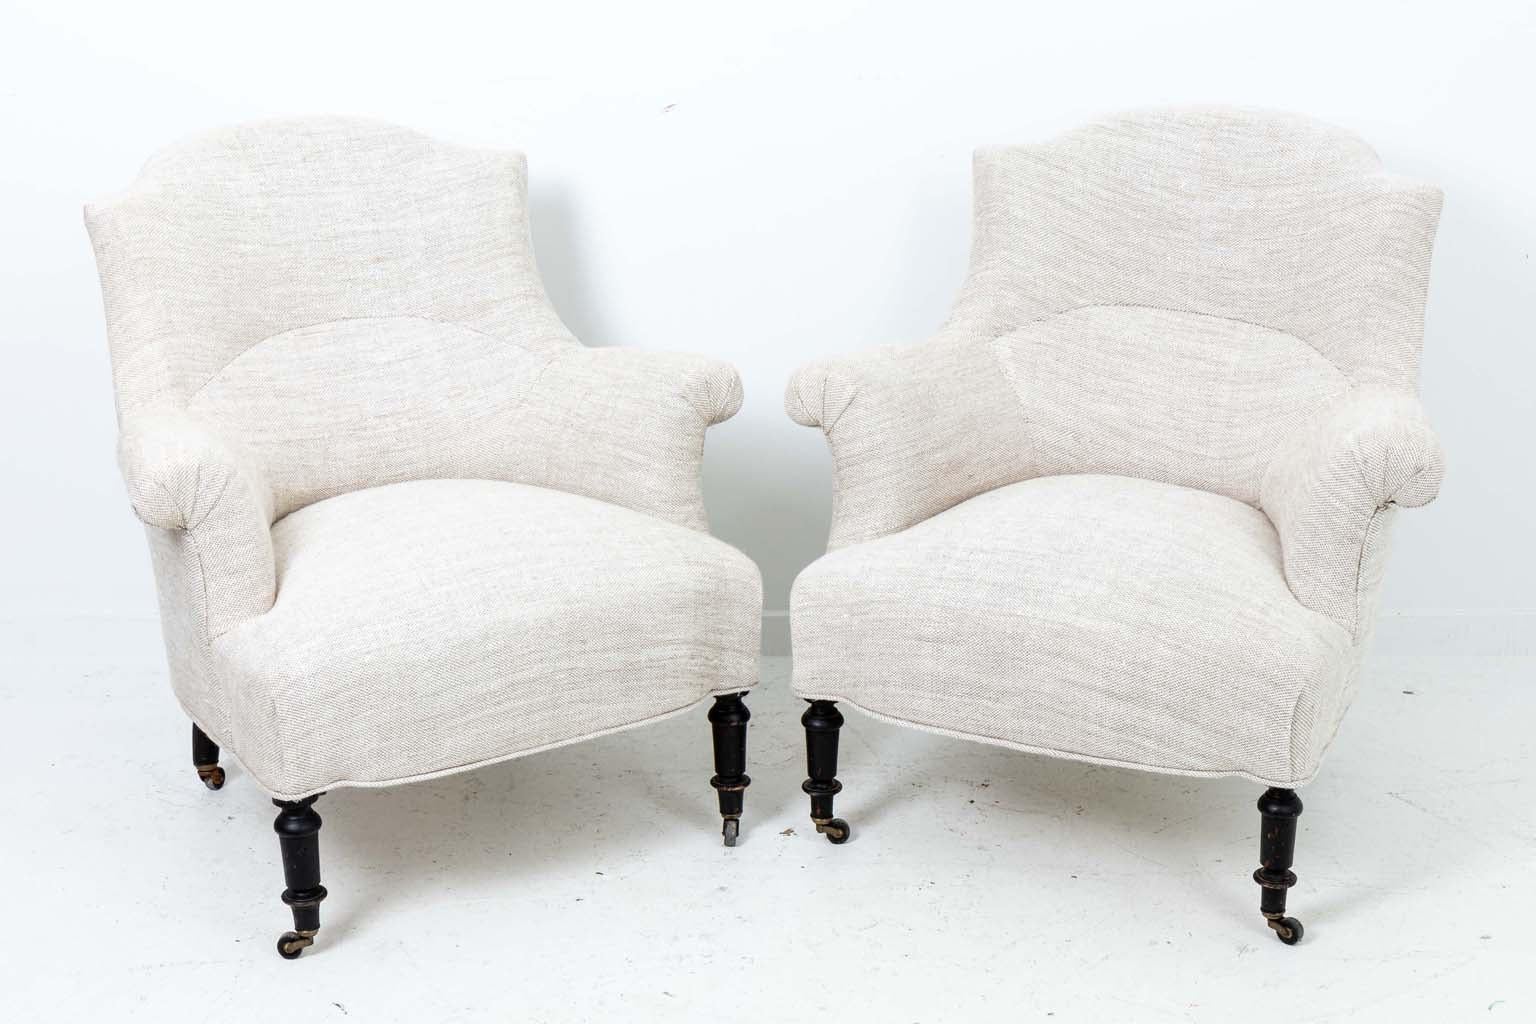 Pair of Napoleon III Arm Chairs, France 1880, freshly upholstered in heavy linen, black ebonized legs.
